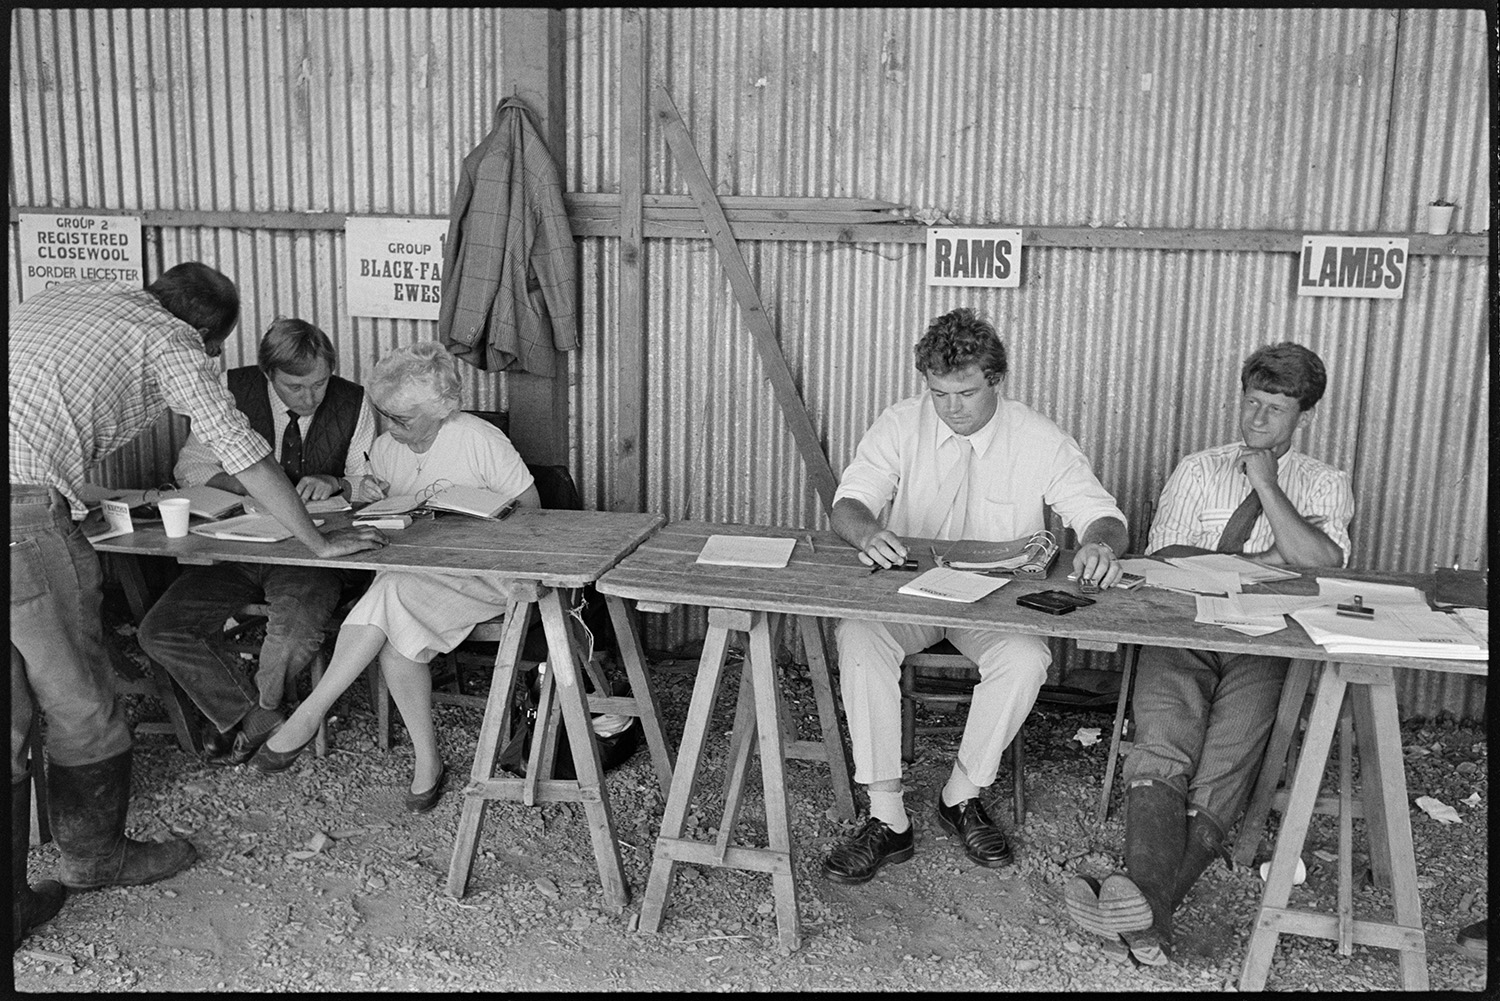 View over pens at sheep fair, farmers checking sheep, clerks at sale office in shed. 
[A man talking to two clerks in the sale office at South Molton Sheep fair. The office is a corrugated iron shed and two other clerks are sat at a table in front of signs reading 'Rams' and 'Lambs'.]